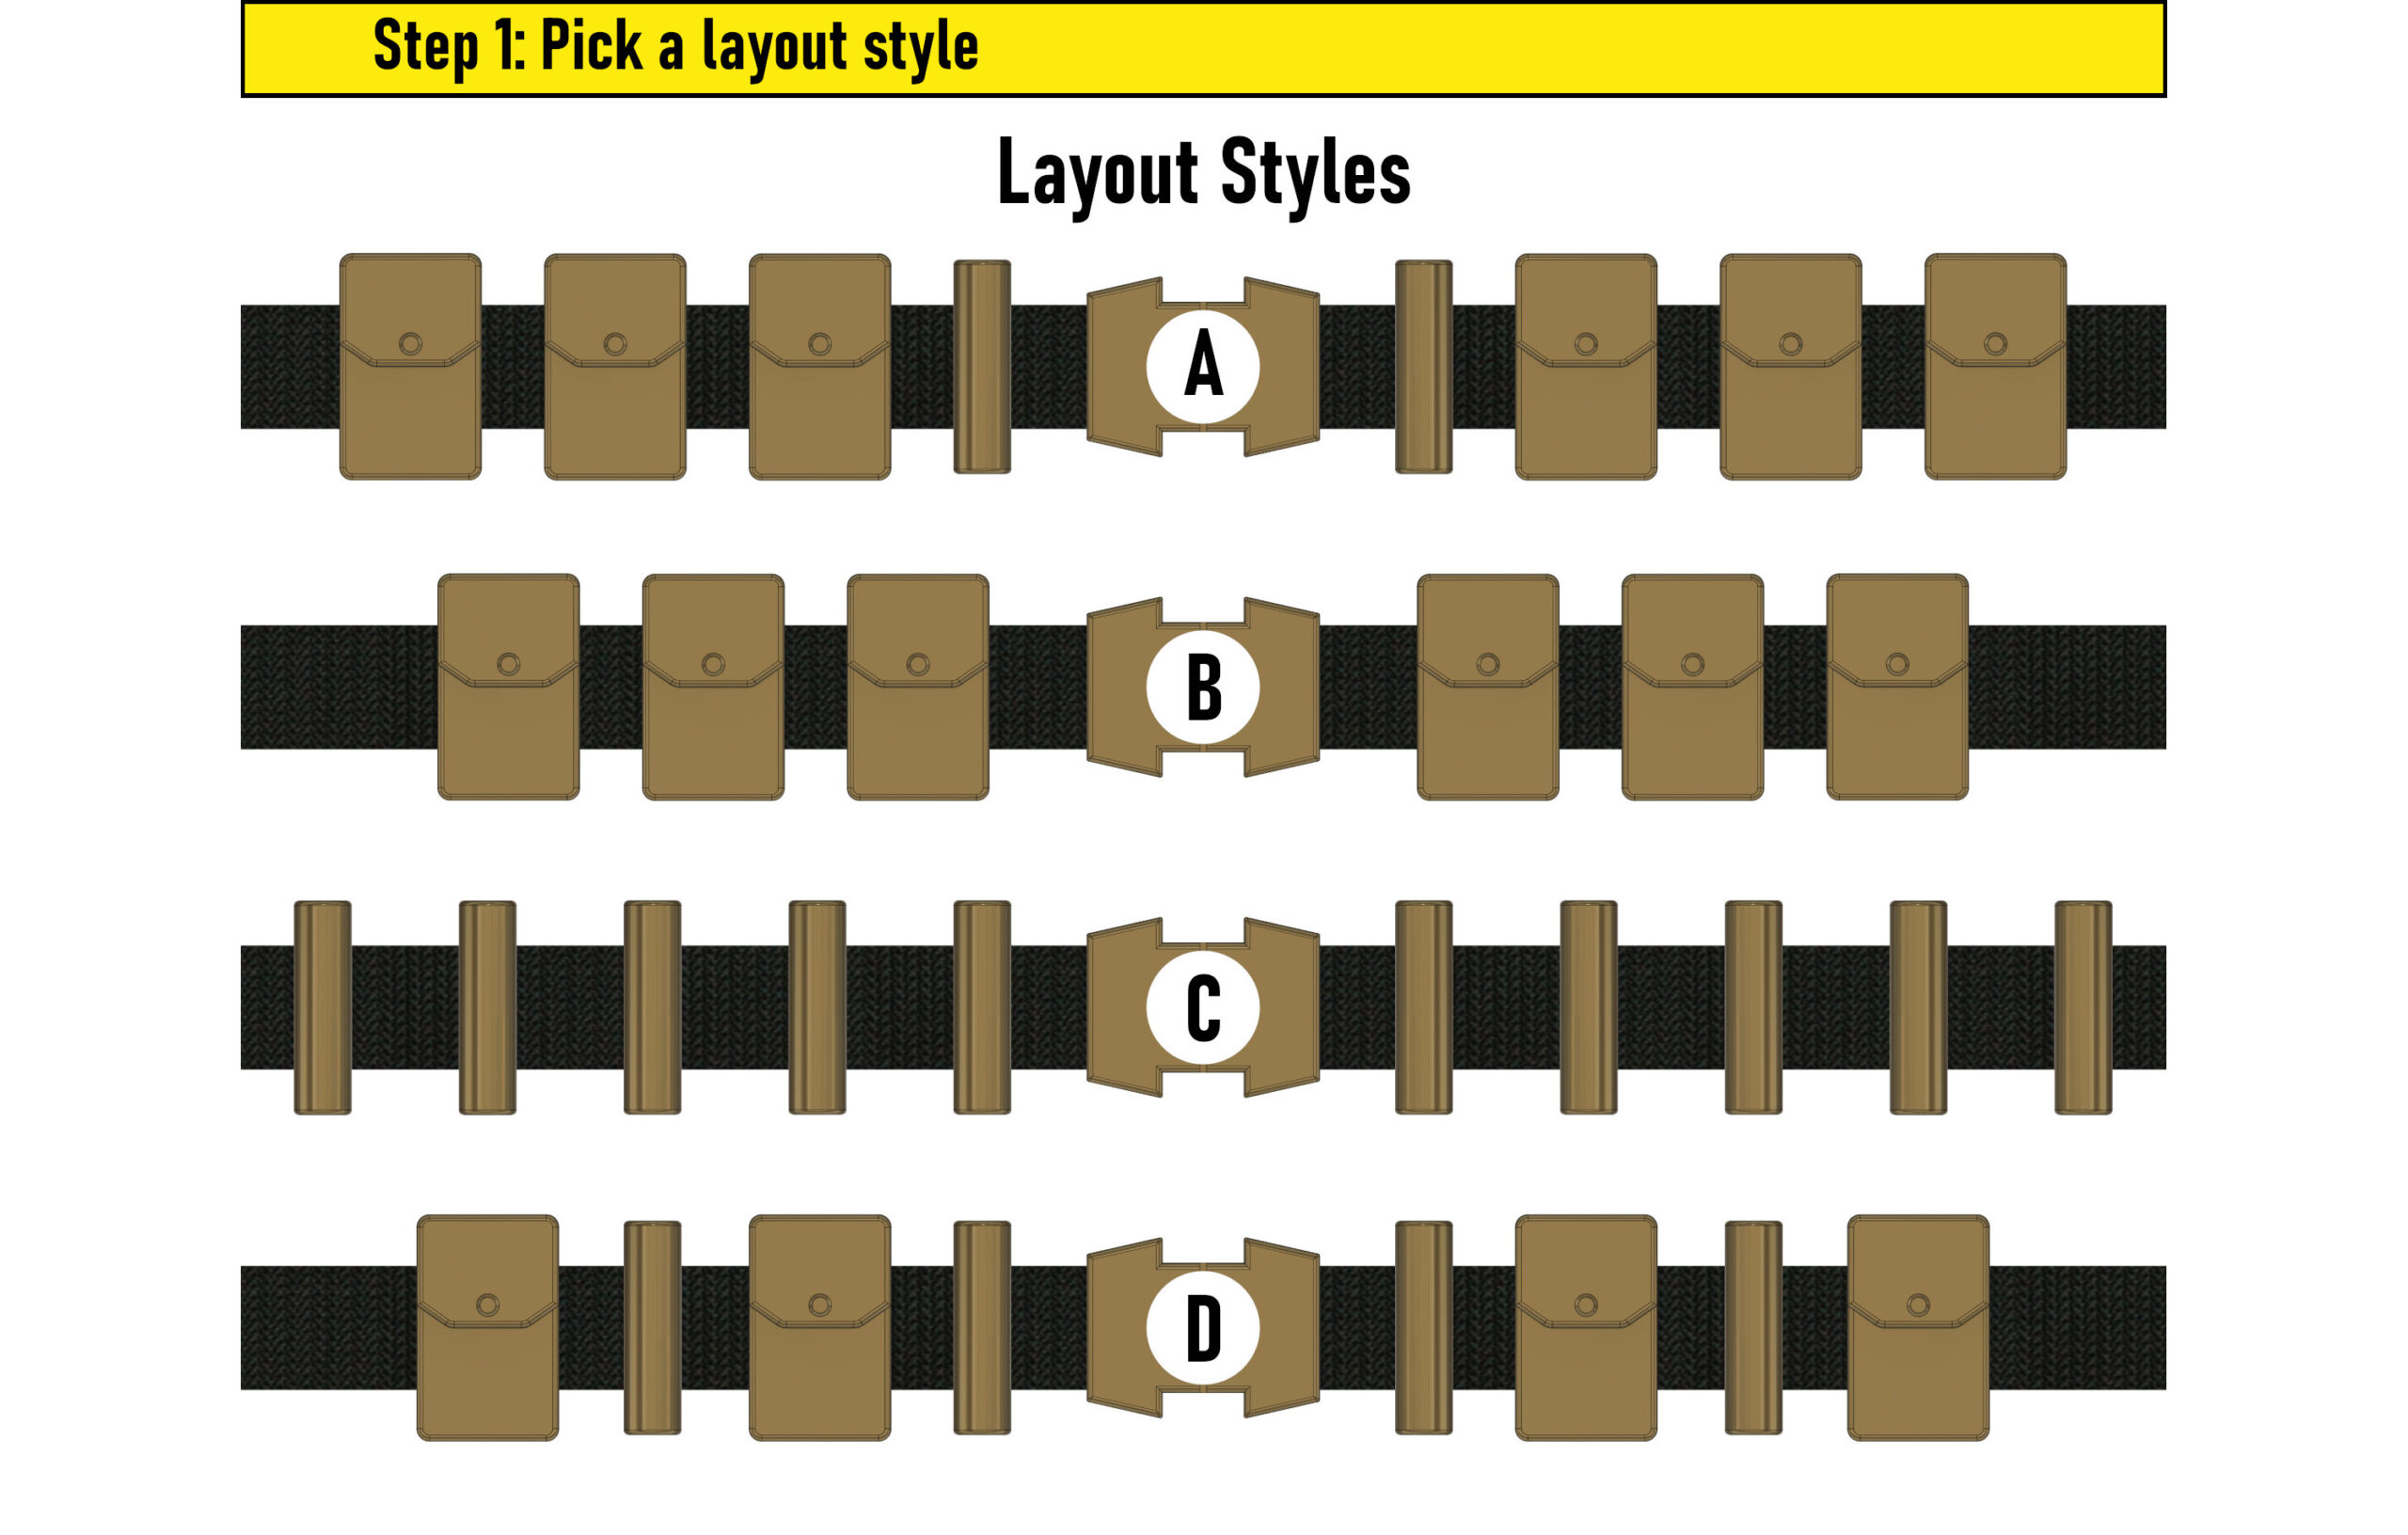 Step 1 layout styles